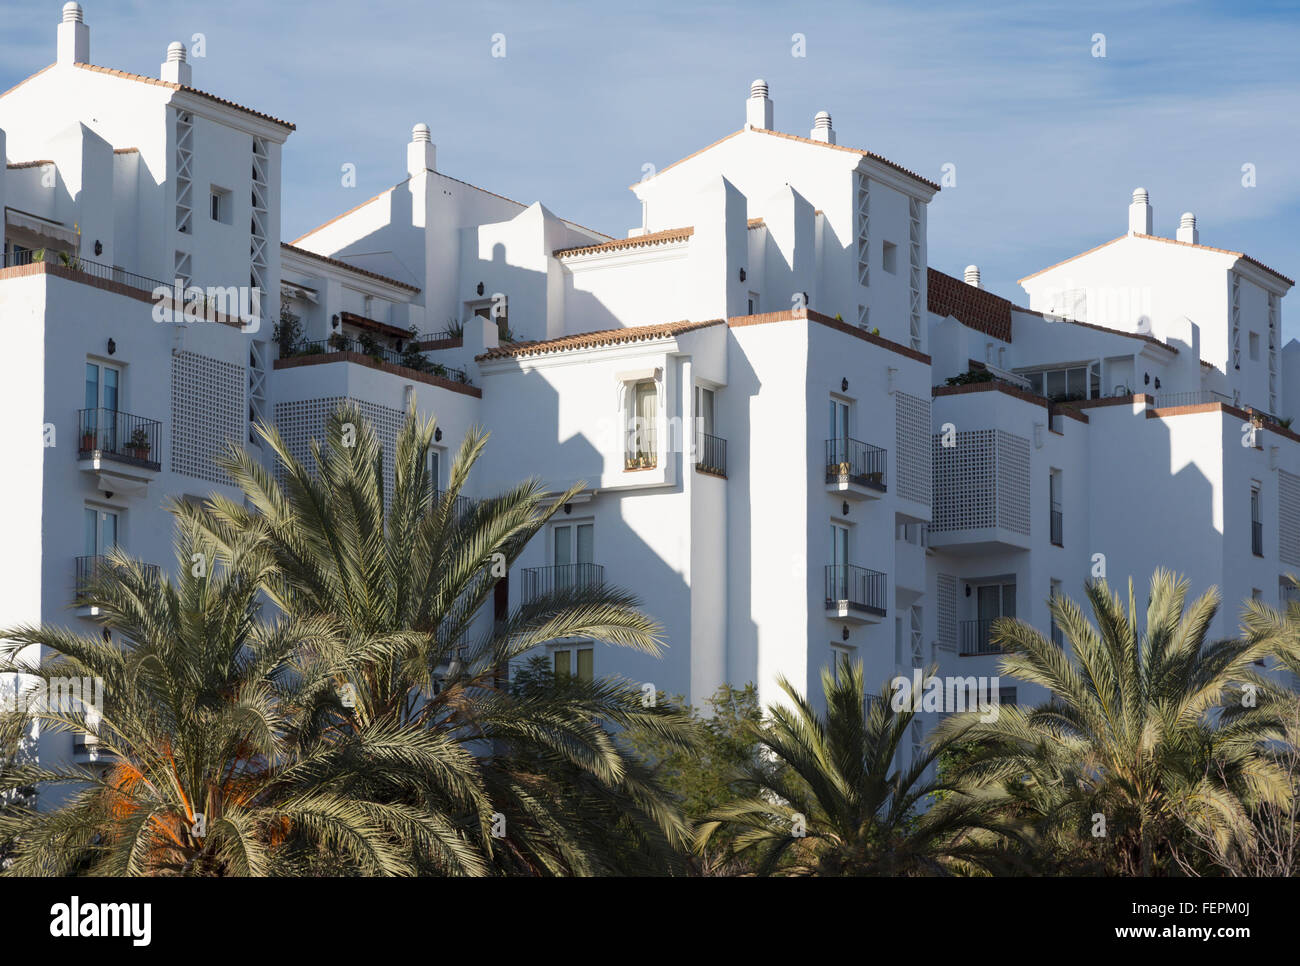 Torremolinos, Costa del Sol, Malaga Province, Andalusia, southern Spain.  Apartments in Playamar suburb. Stock Photo